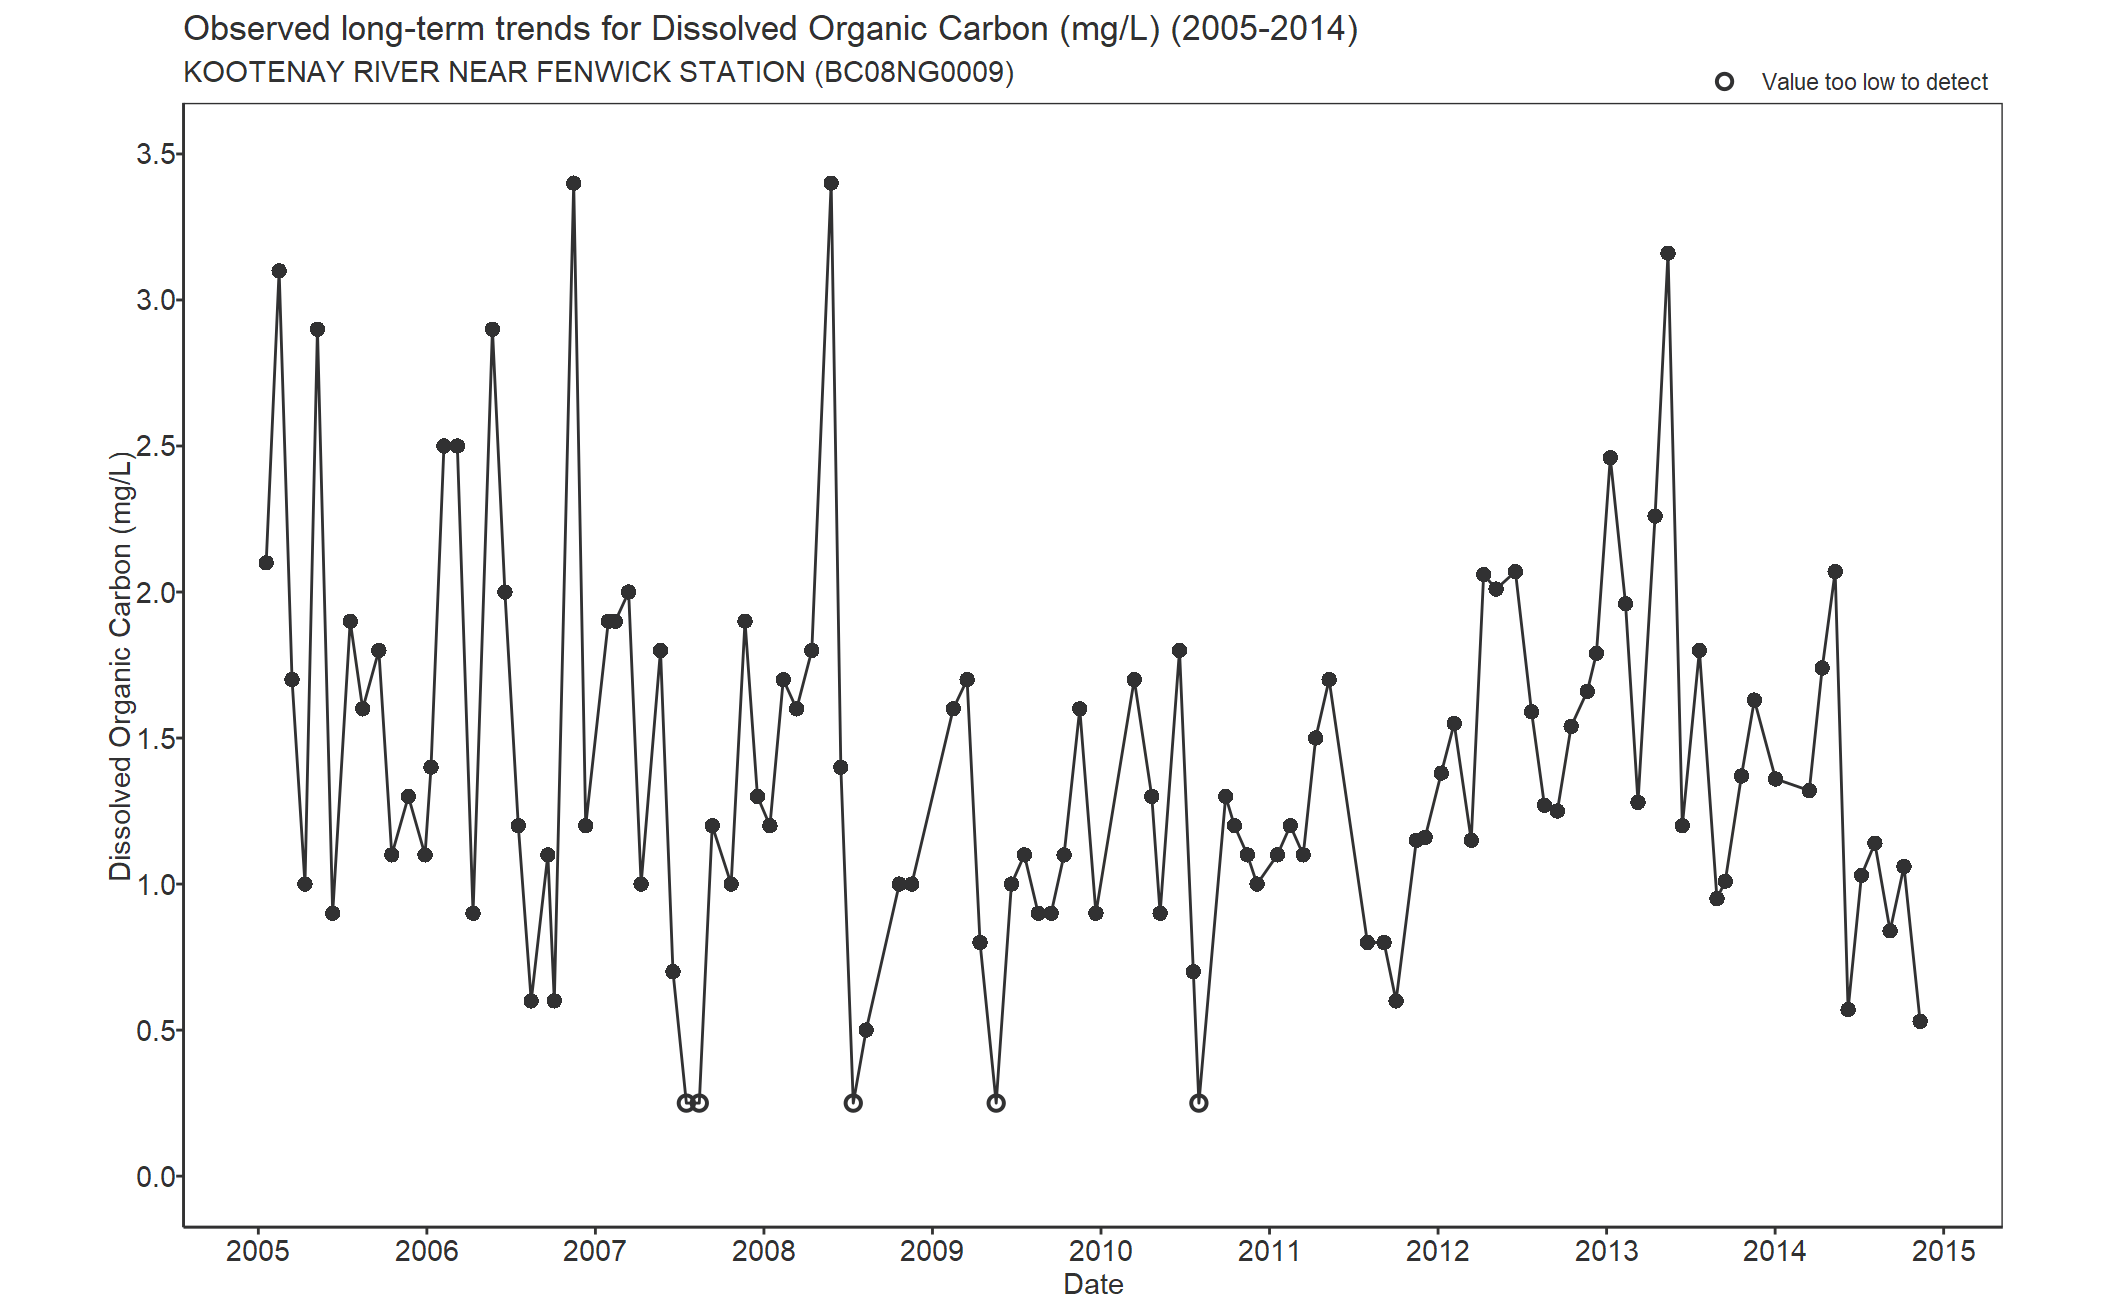 Observed long-term trends for Carbon Dissolved Organic (2005-2014)